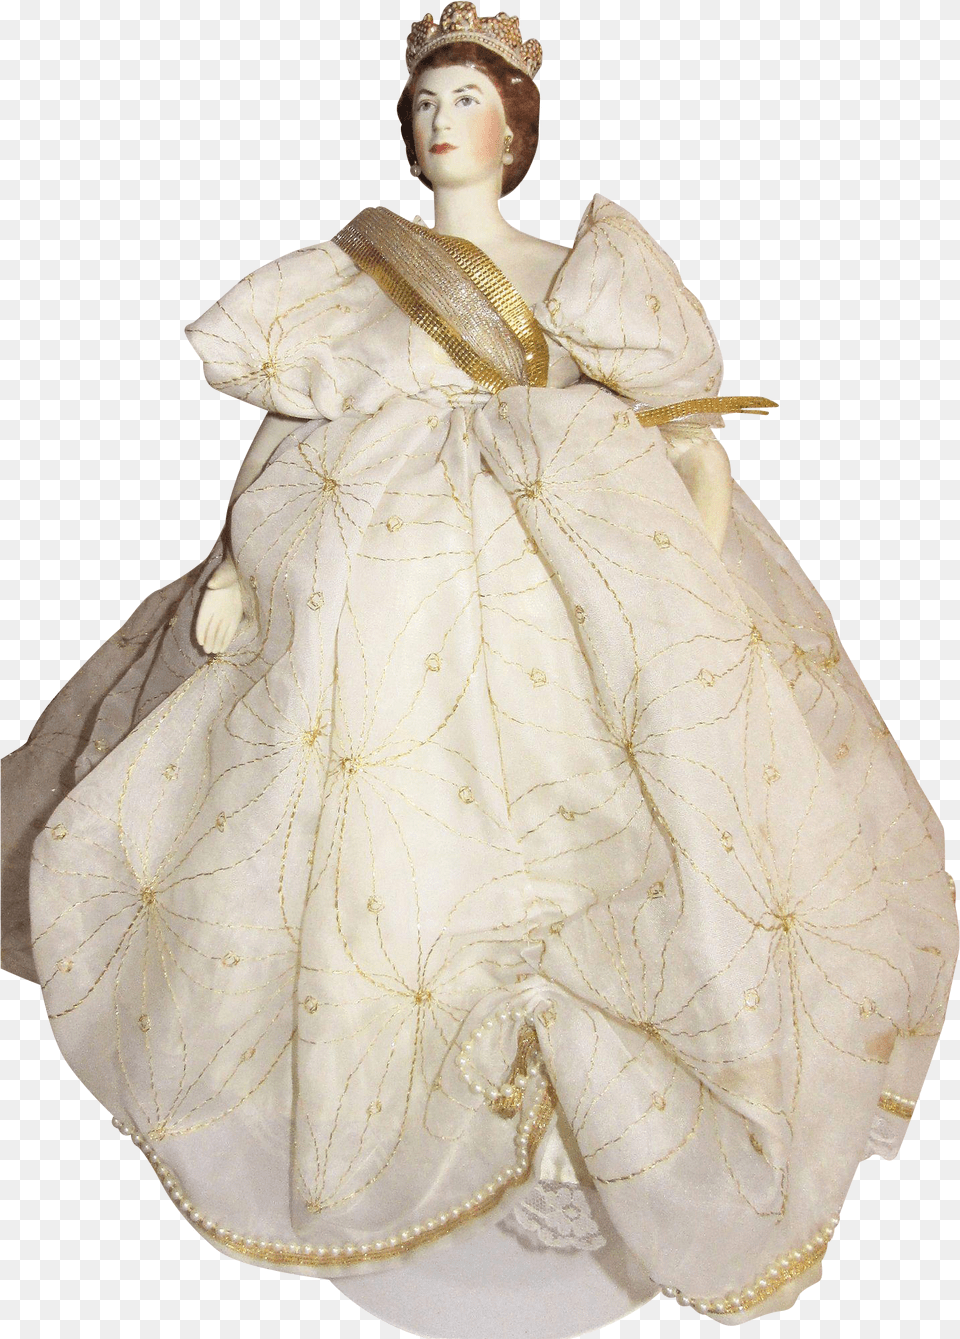 Queen Elizabeth Coronation Doll By Lathrop Signed Costume, Adult, Wedding, Person, Woman Png